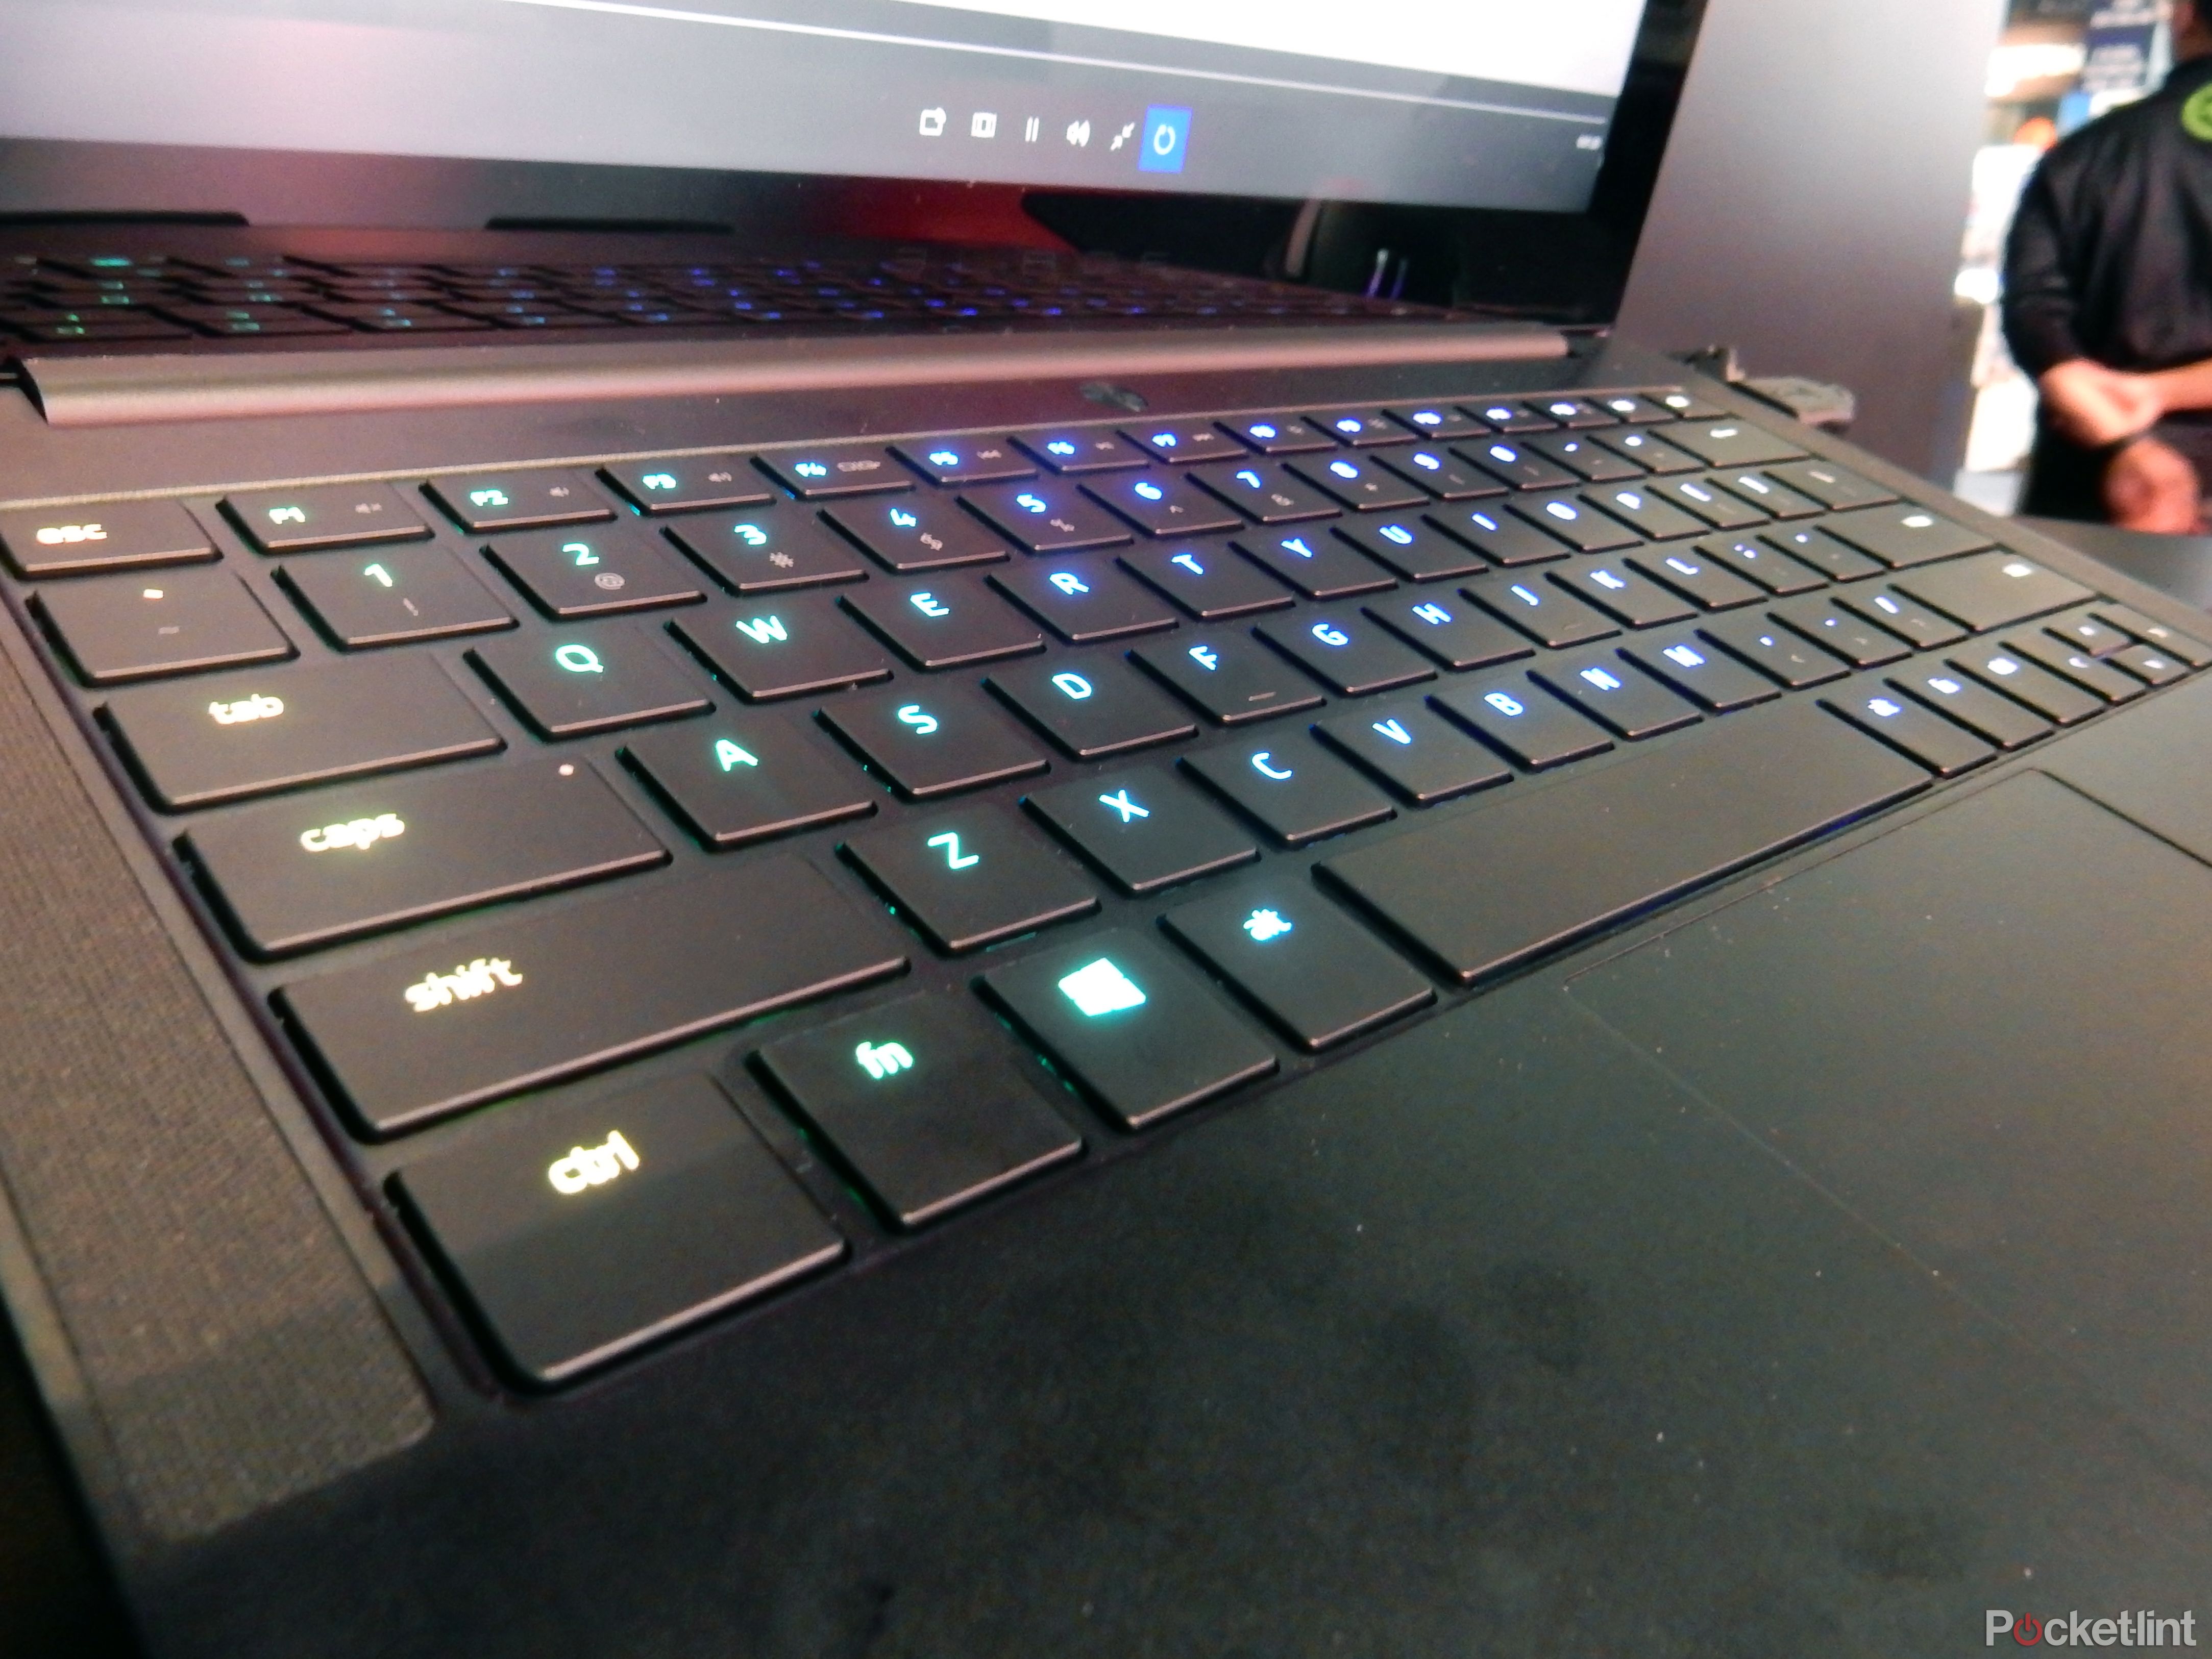 razer enters ultrabook territory with this new beaut image 11